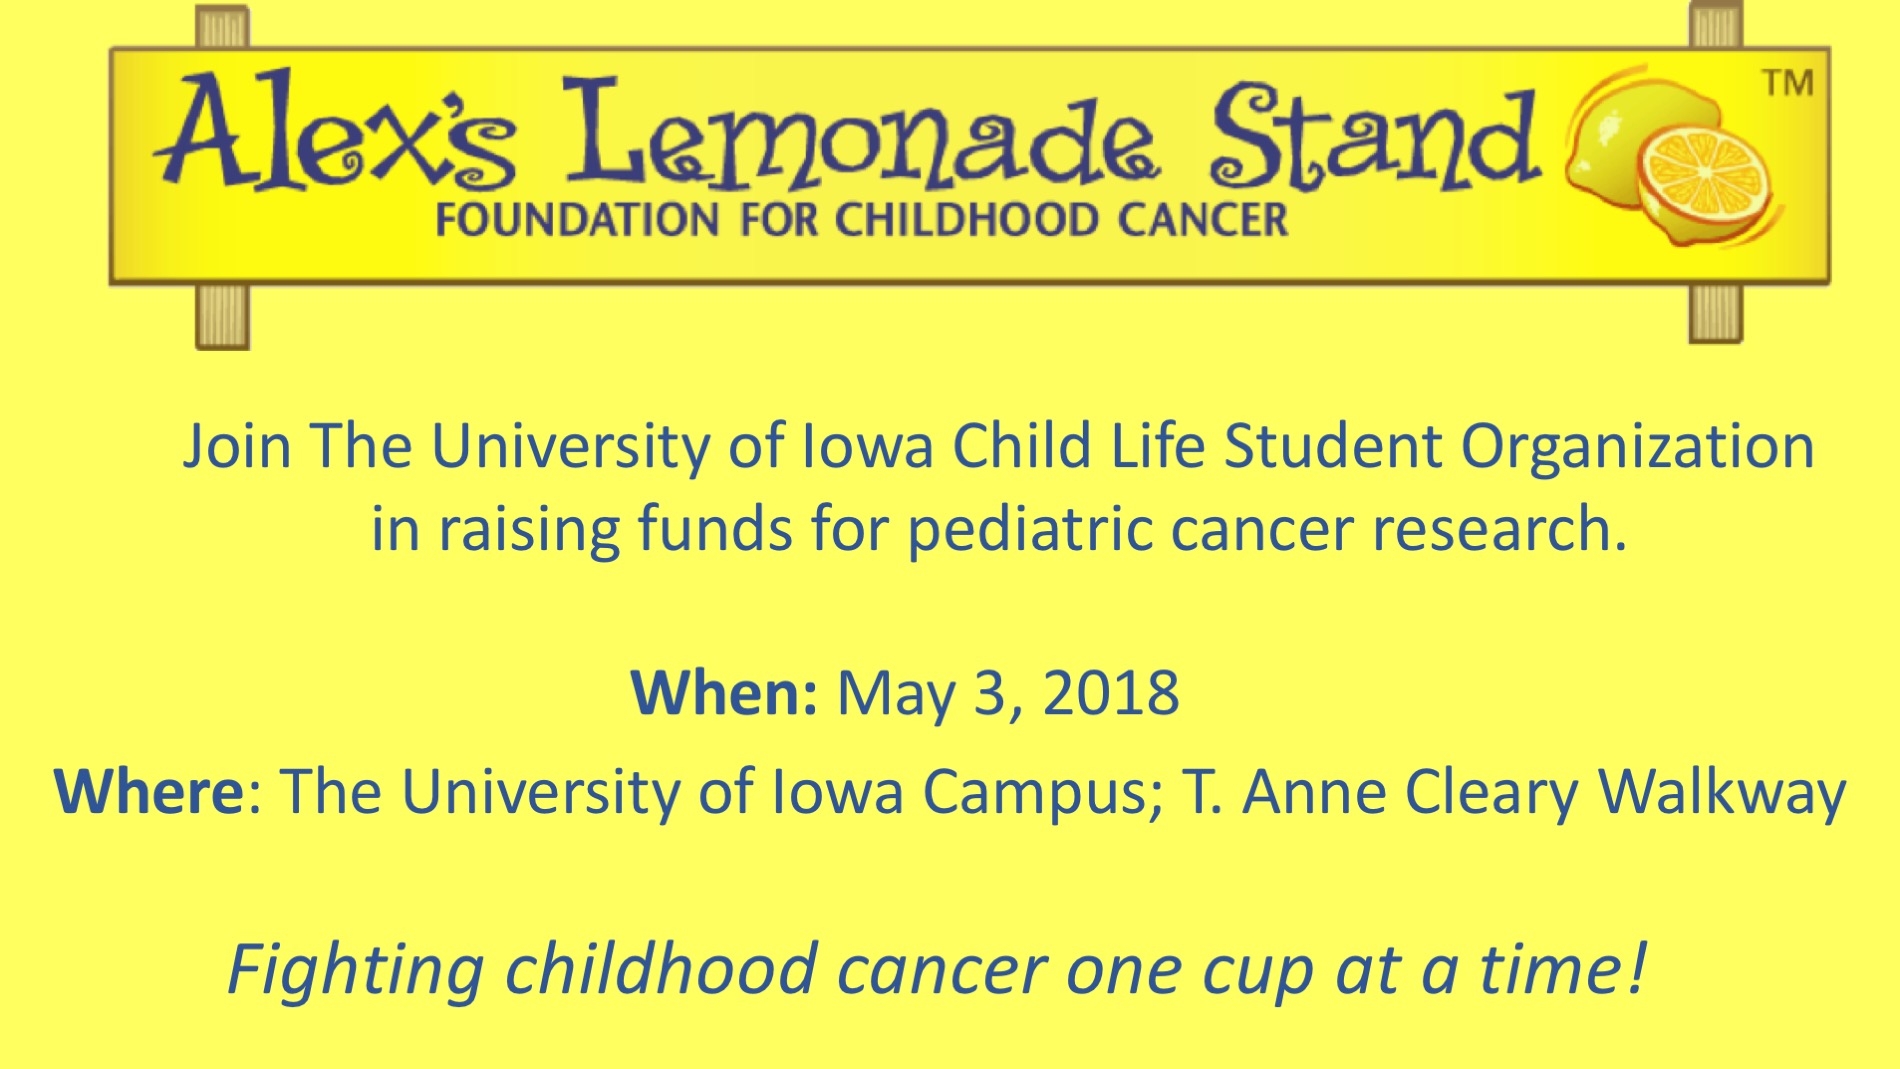 Ale's Lemonade Stand (yellow background with lemons) - May 3, 2018, The University of Iowa Campus, T. Anne Cleary Walkway